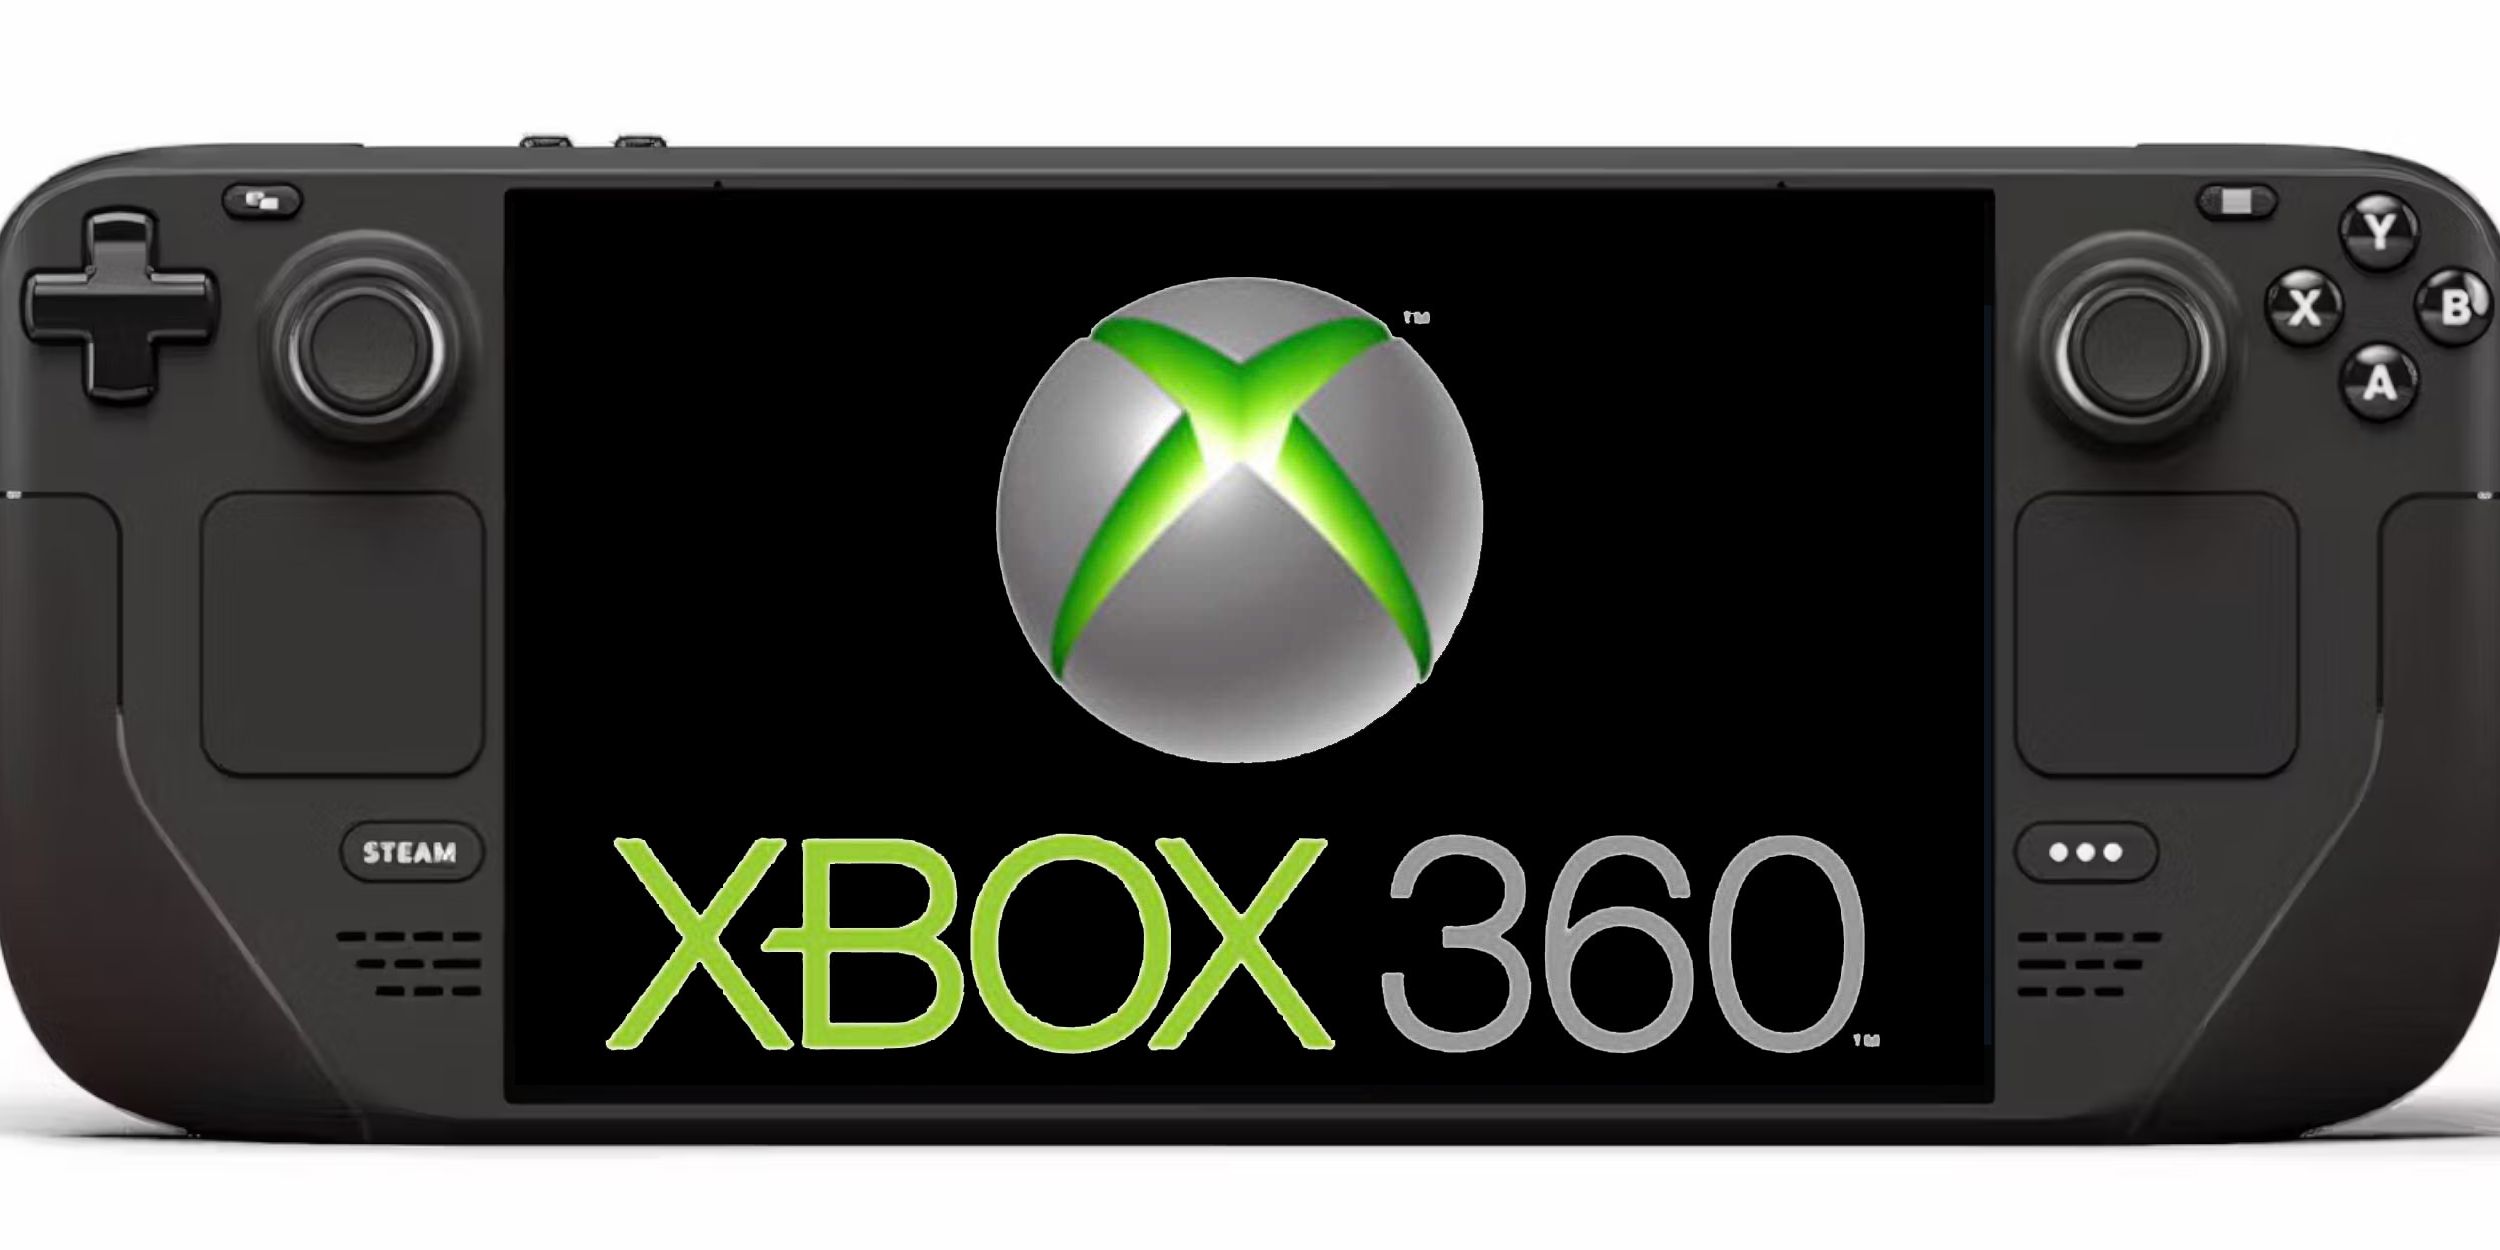 Steam Deck with the Xbox 360 logo